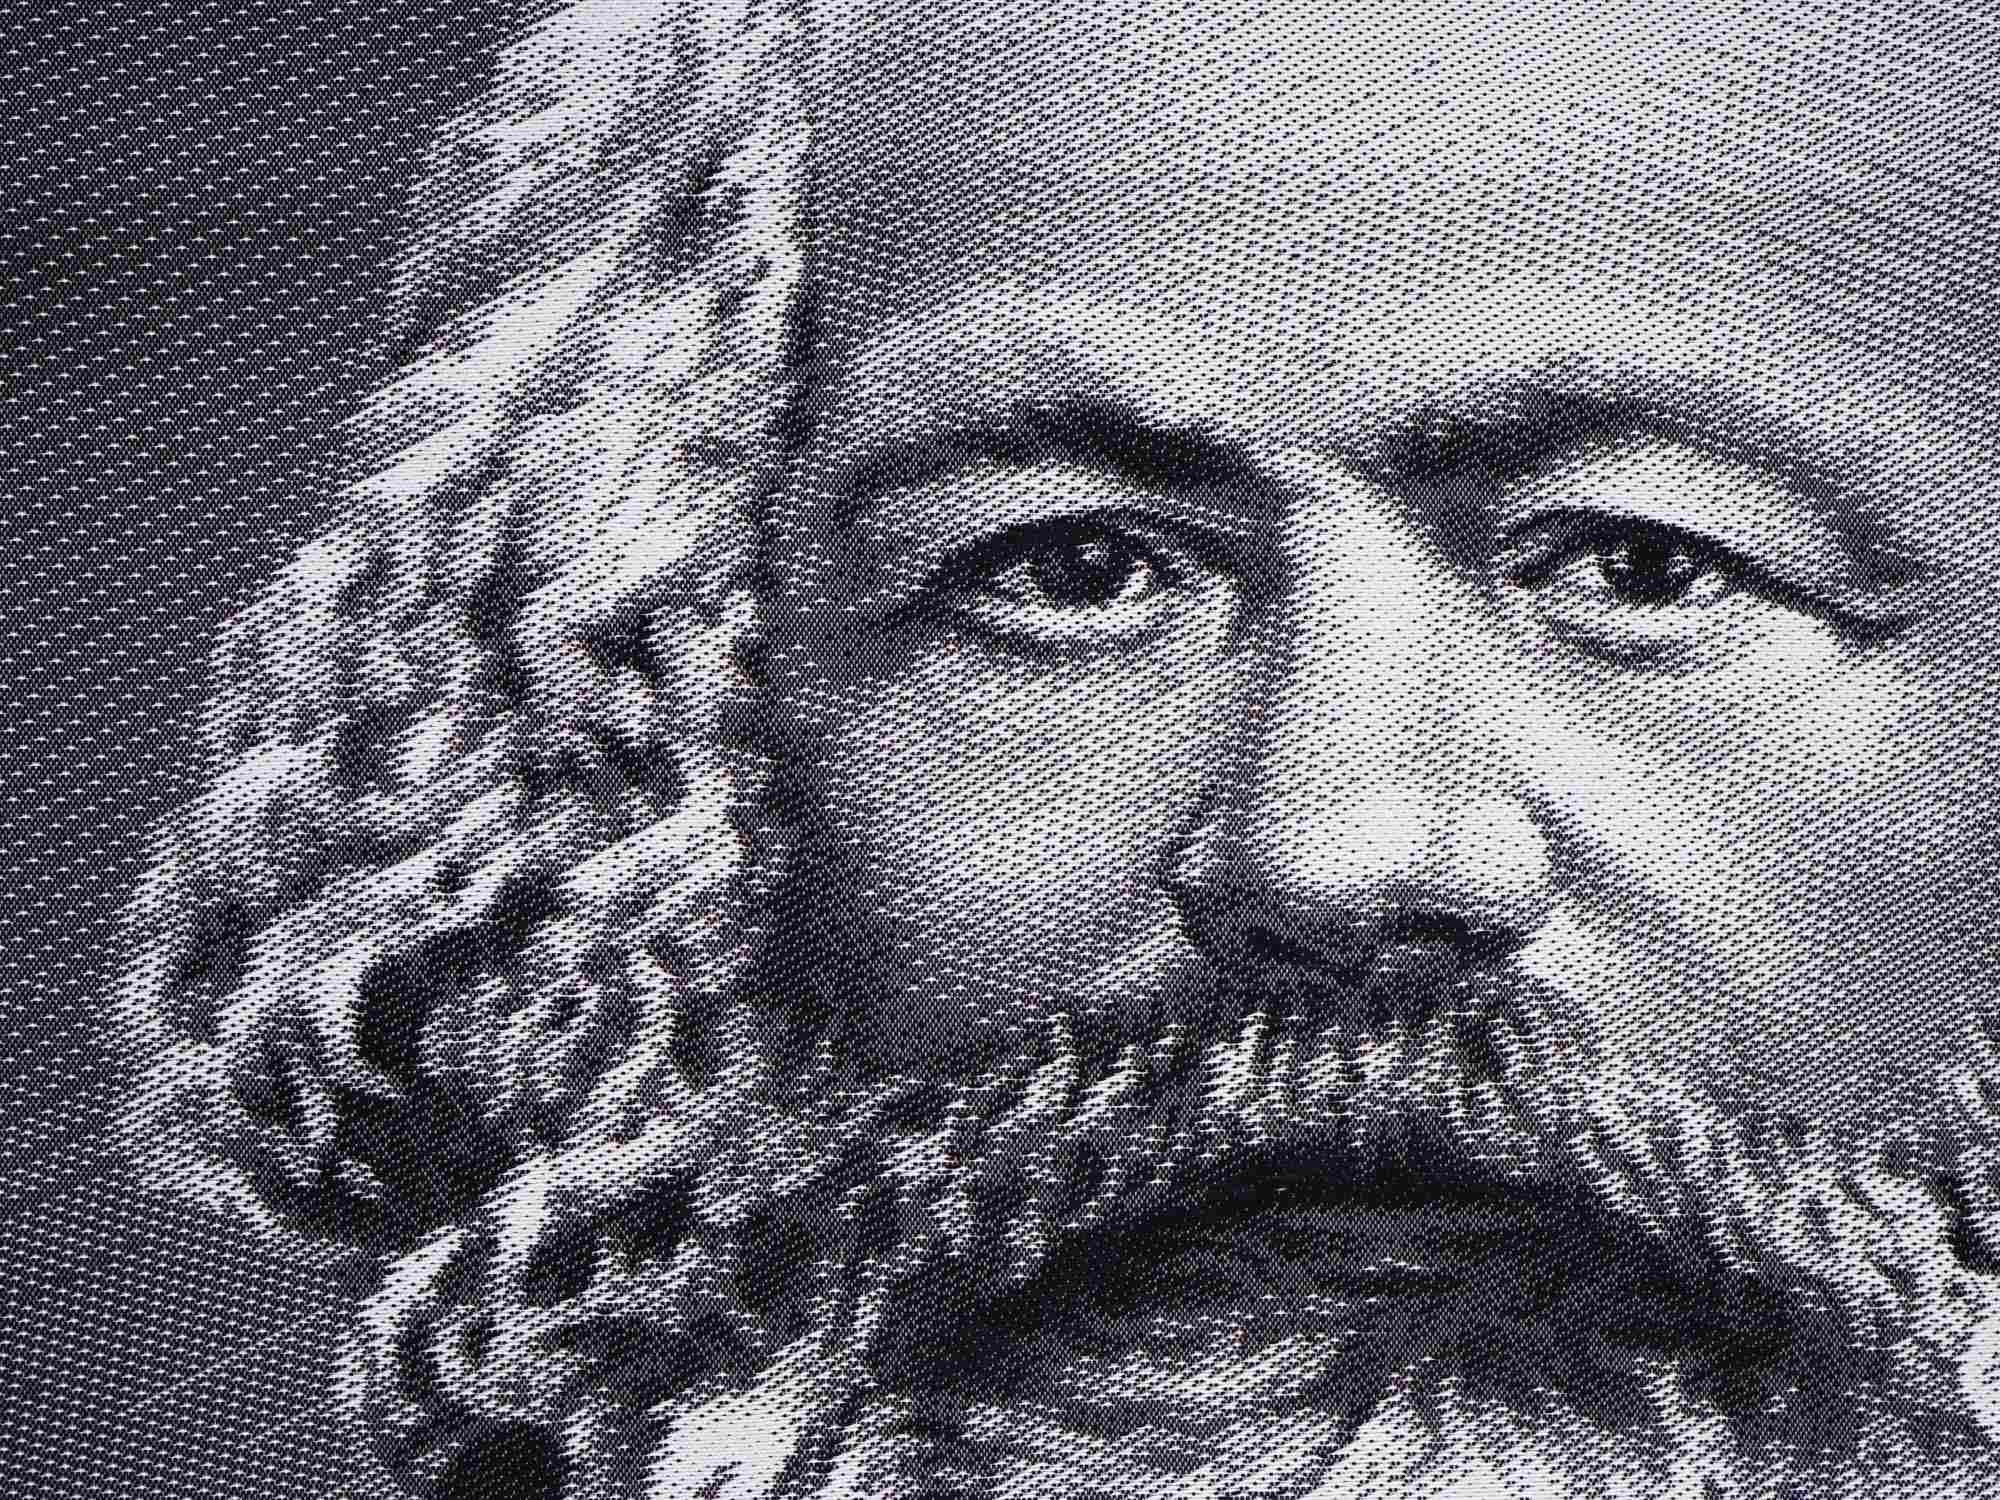 CHINESE COMMUNIST SILK TAPESTRY OF KARL MARX PIC-1